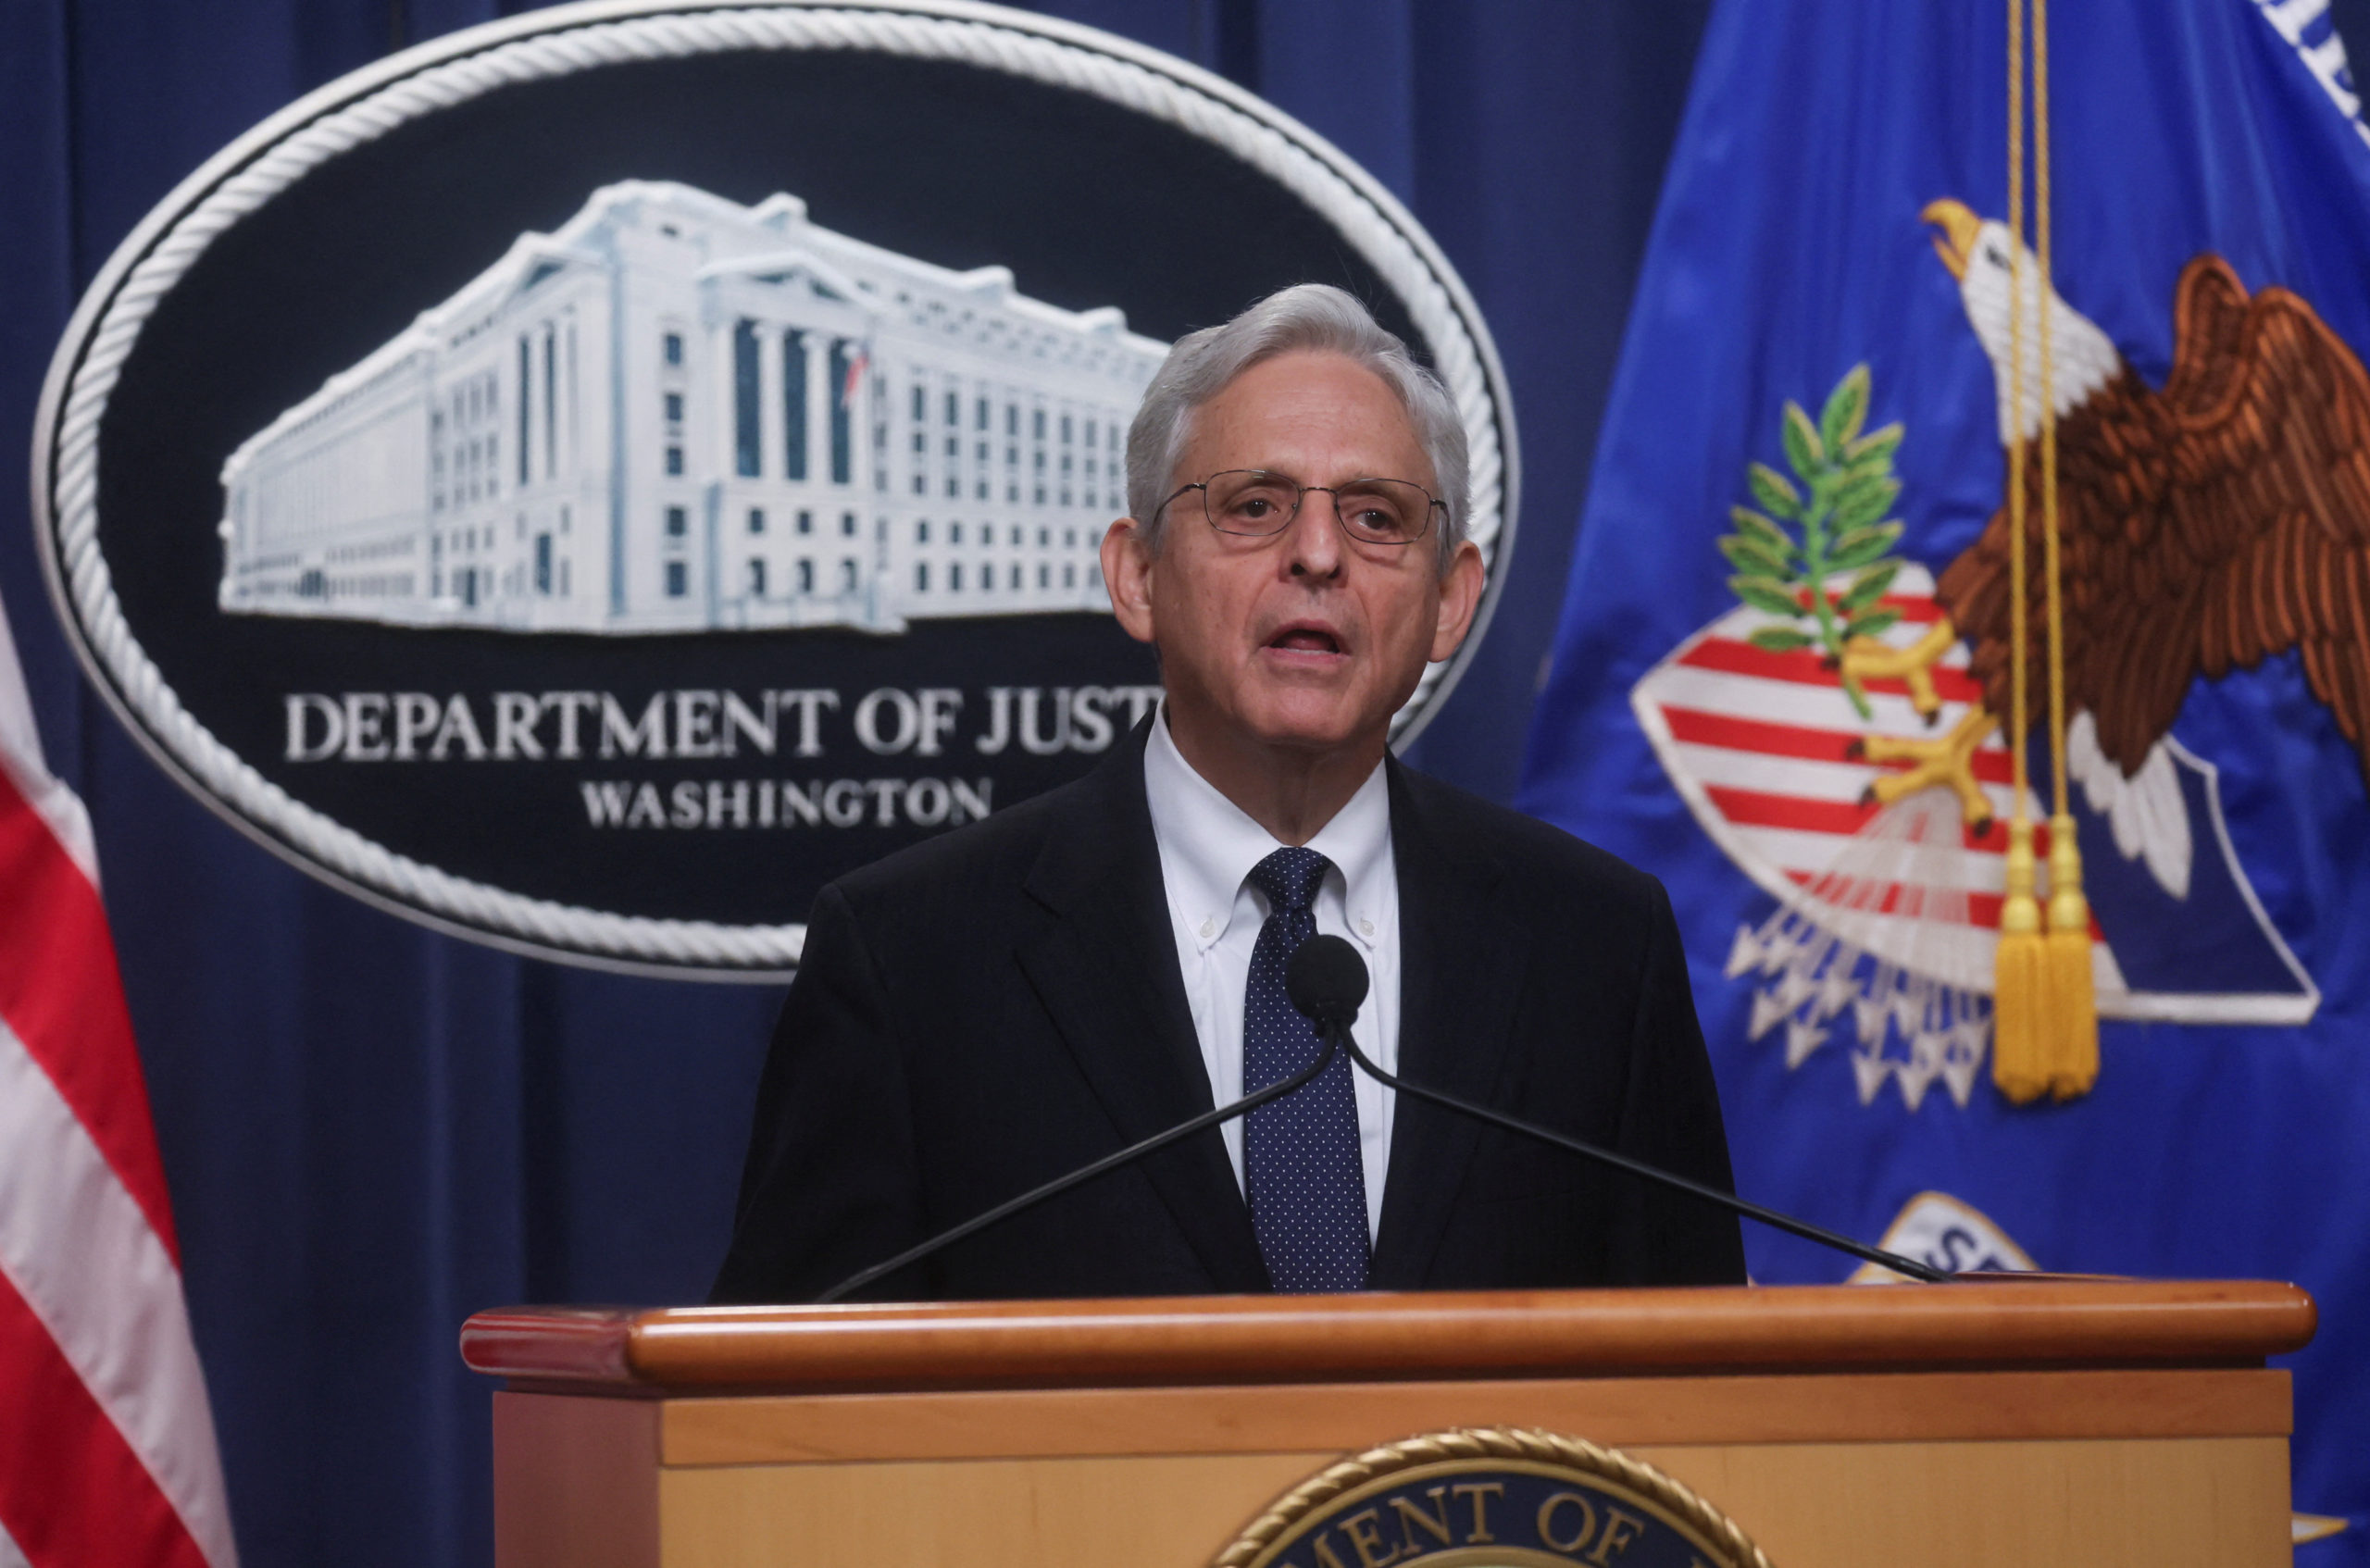 U.S. Attorney General Merrick Garland speaks about the FBI's search warrant served at former President Donald Trump's Mar-a-Lago estate in Florida during a statement at the U.S. Justice Department in Washington, U.S., August 11, 2022. REUTERS/Leah Millis